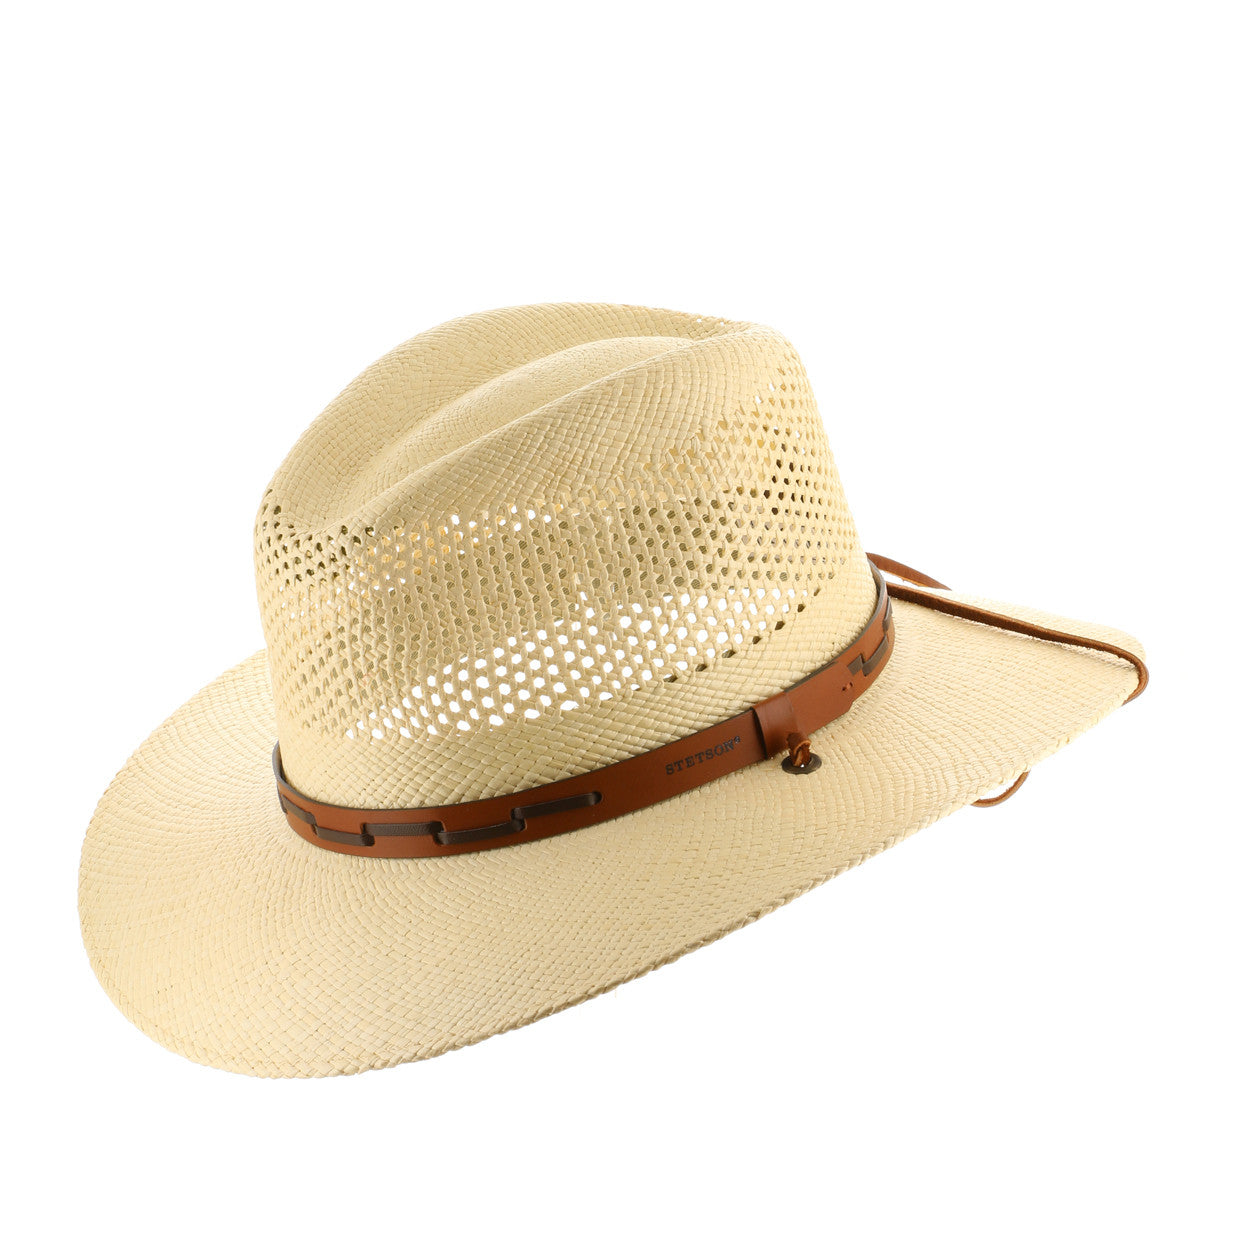 Men's Straw Hats for Sun Protection 